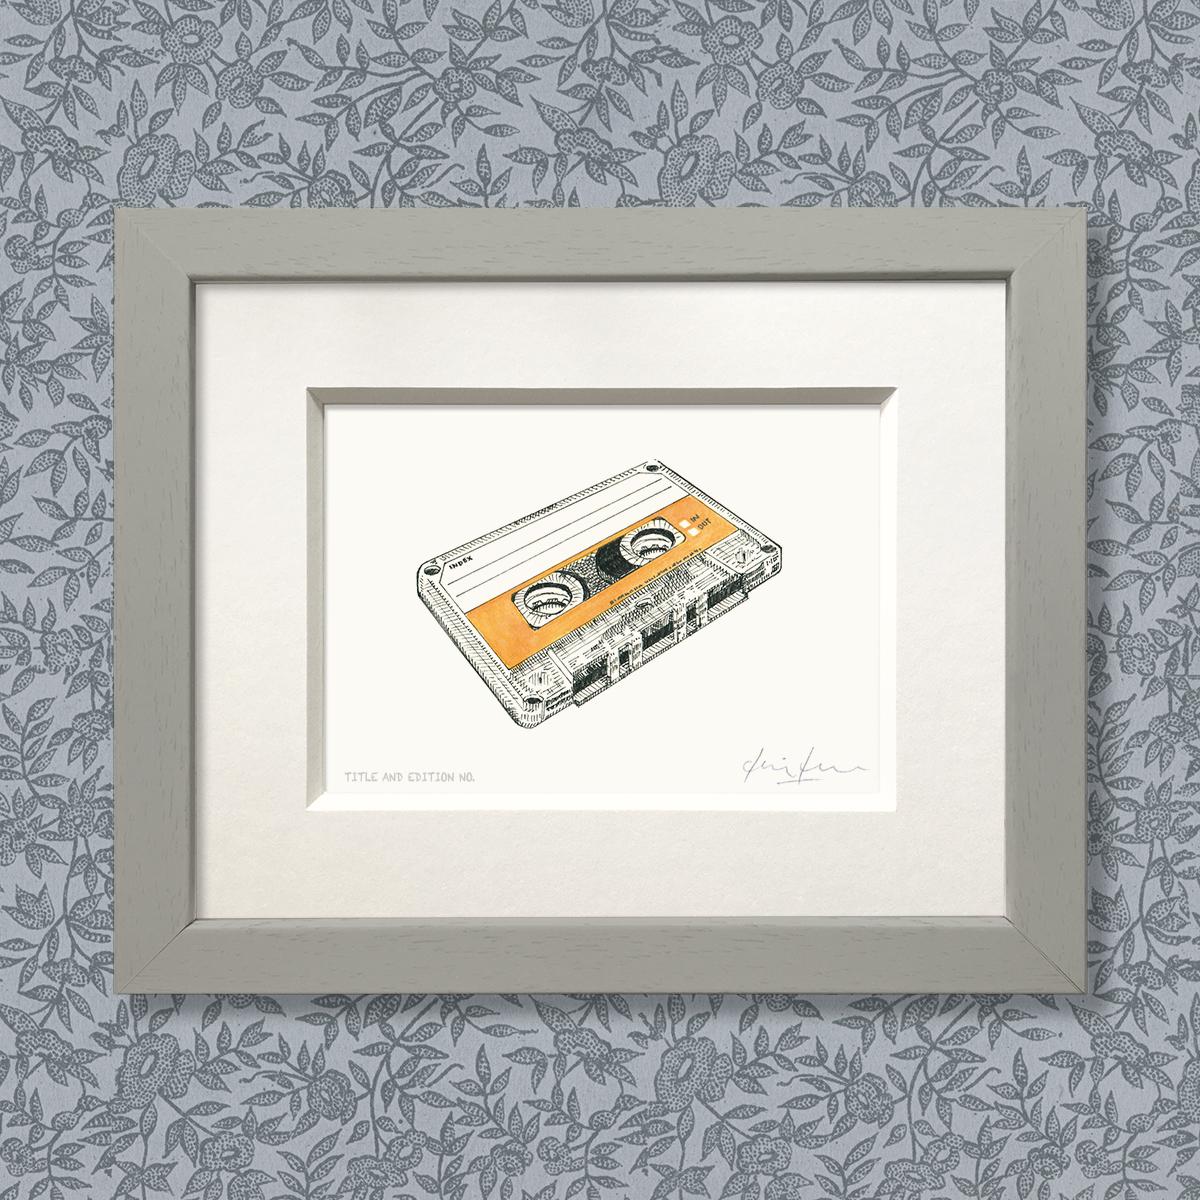 Limited edition print from pen, ink and watercolour sketch of a cassette tape in a grey frame